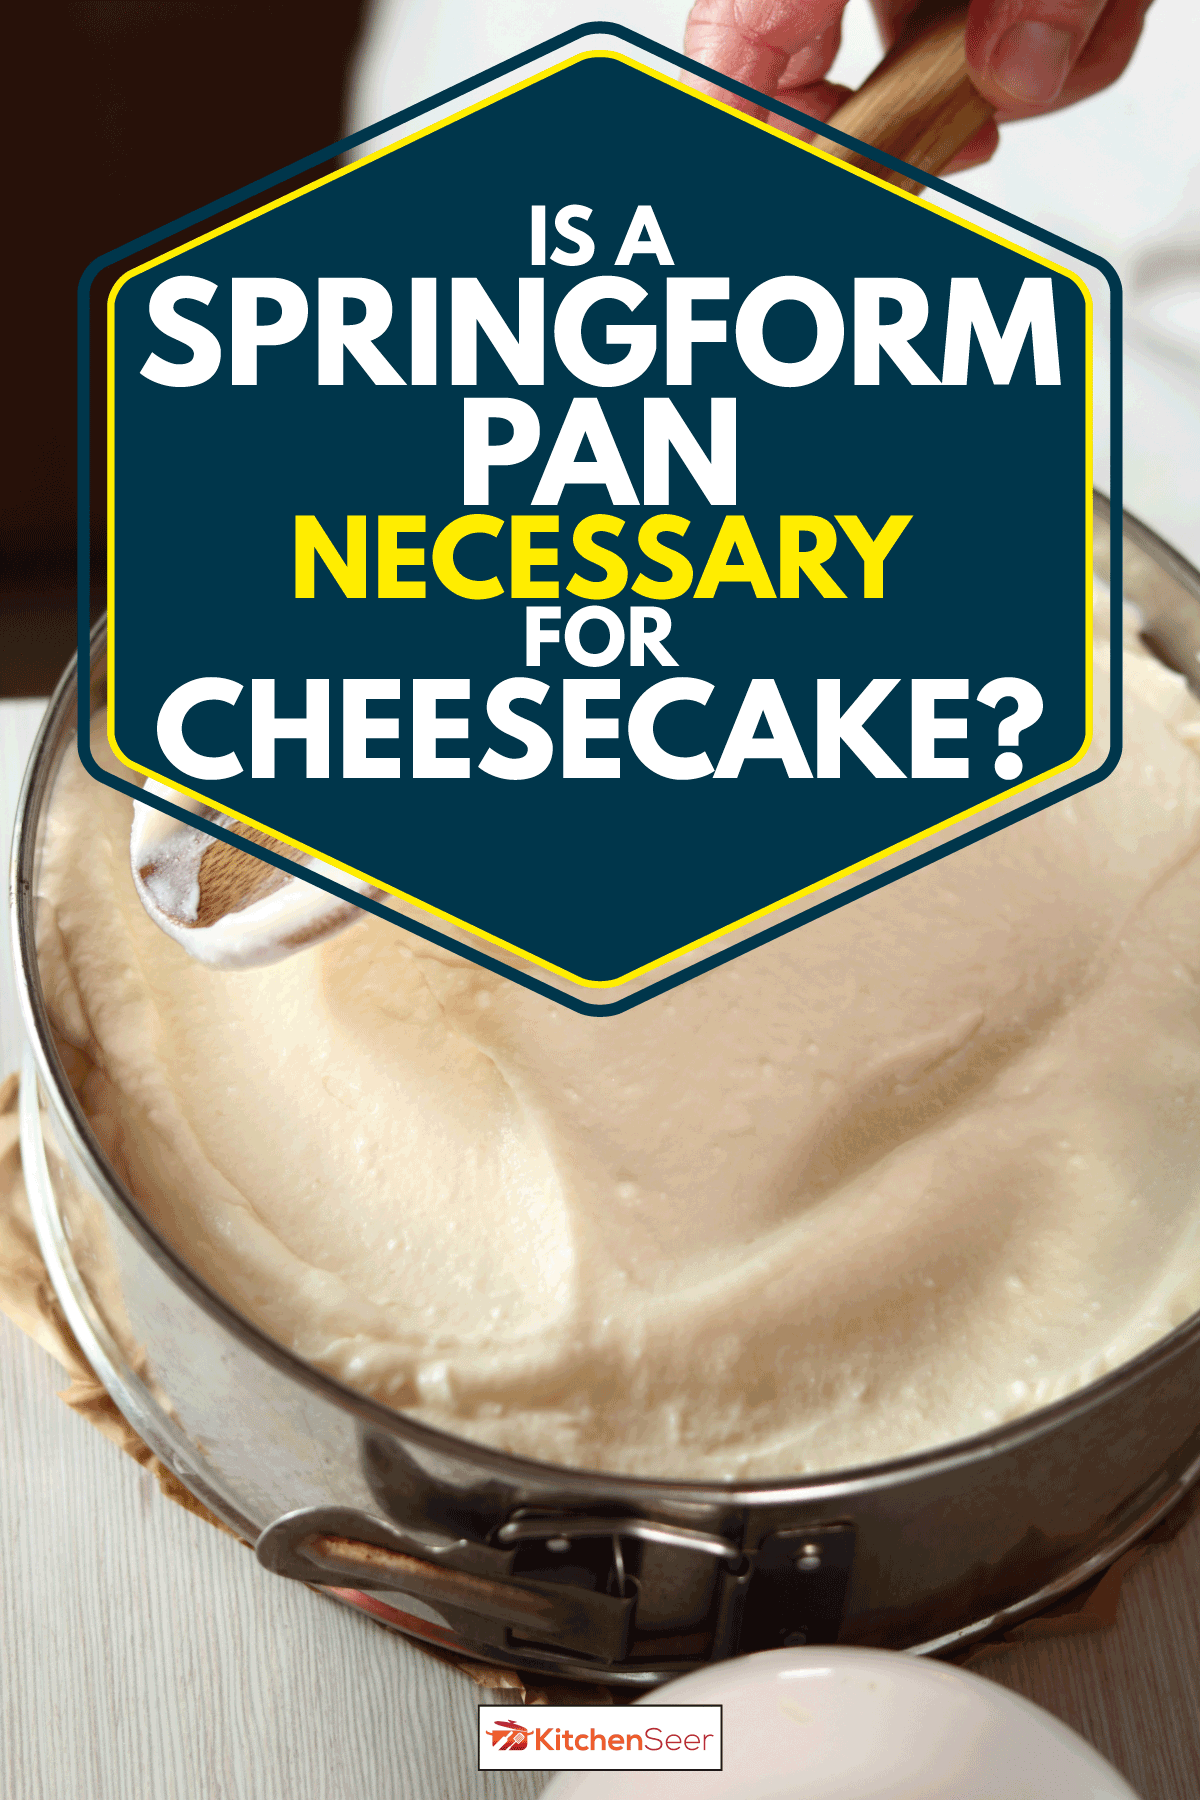 Levelling cheesecake batter on a springform pan, Is A Springform Pan Necessary For Cheesecake?